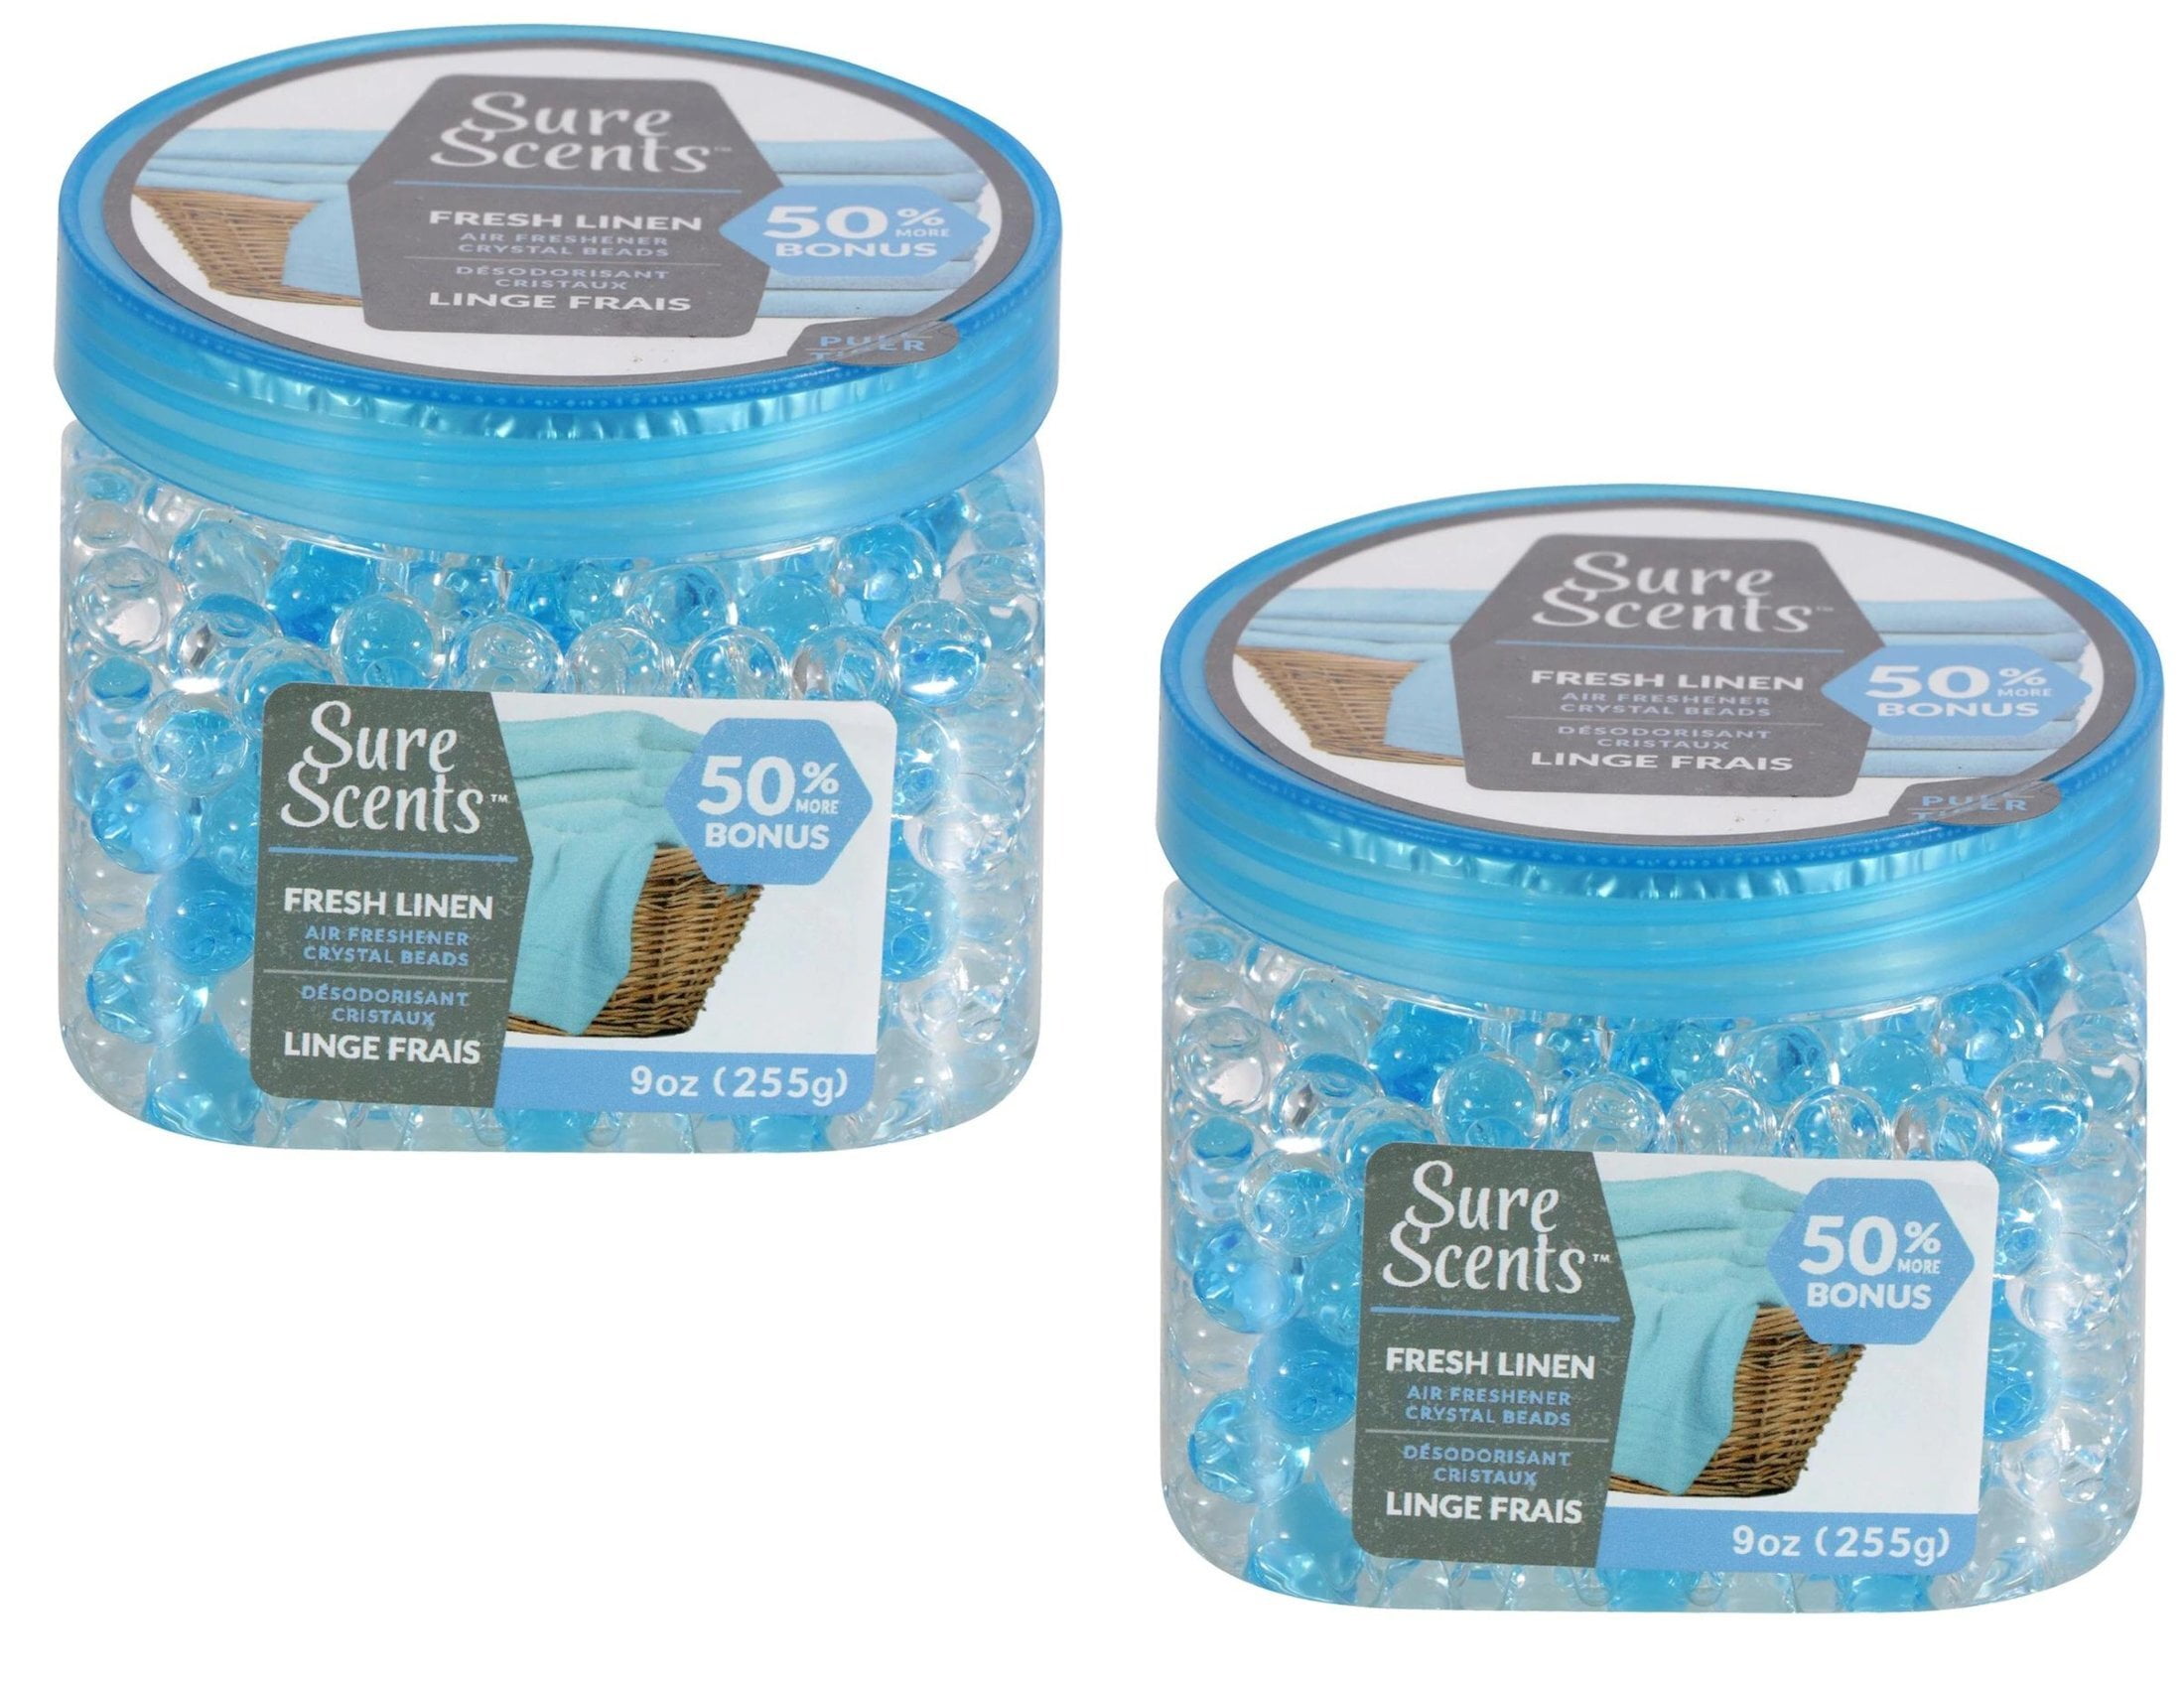 Unscented Aroma Beads 15oz - Scentsy Wax Beads for Car Freshies Scents